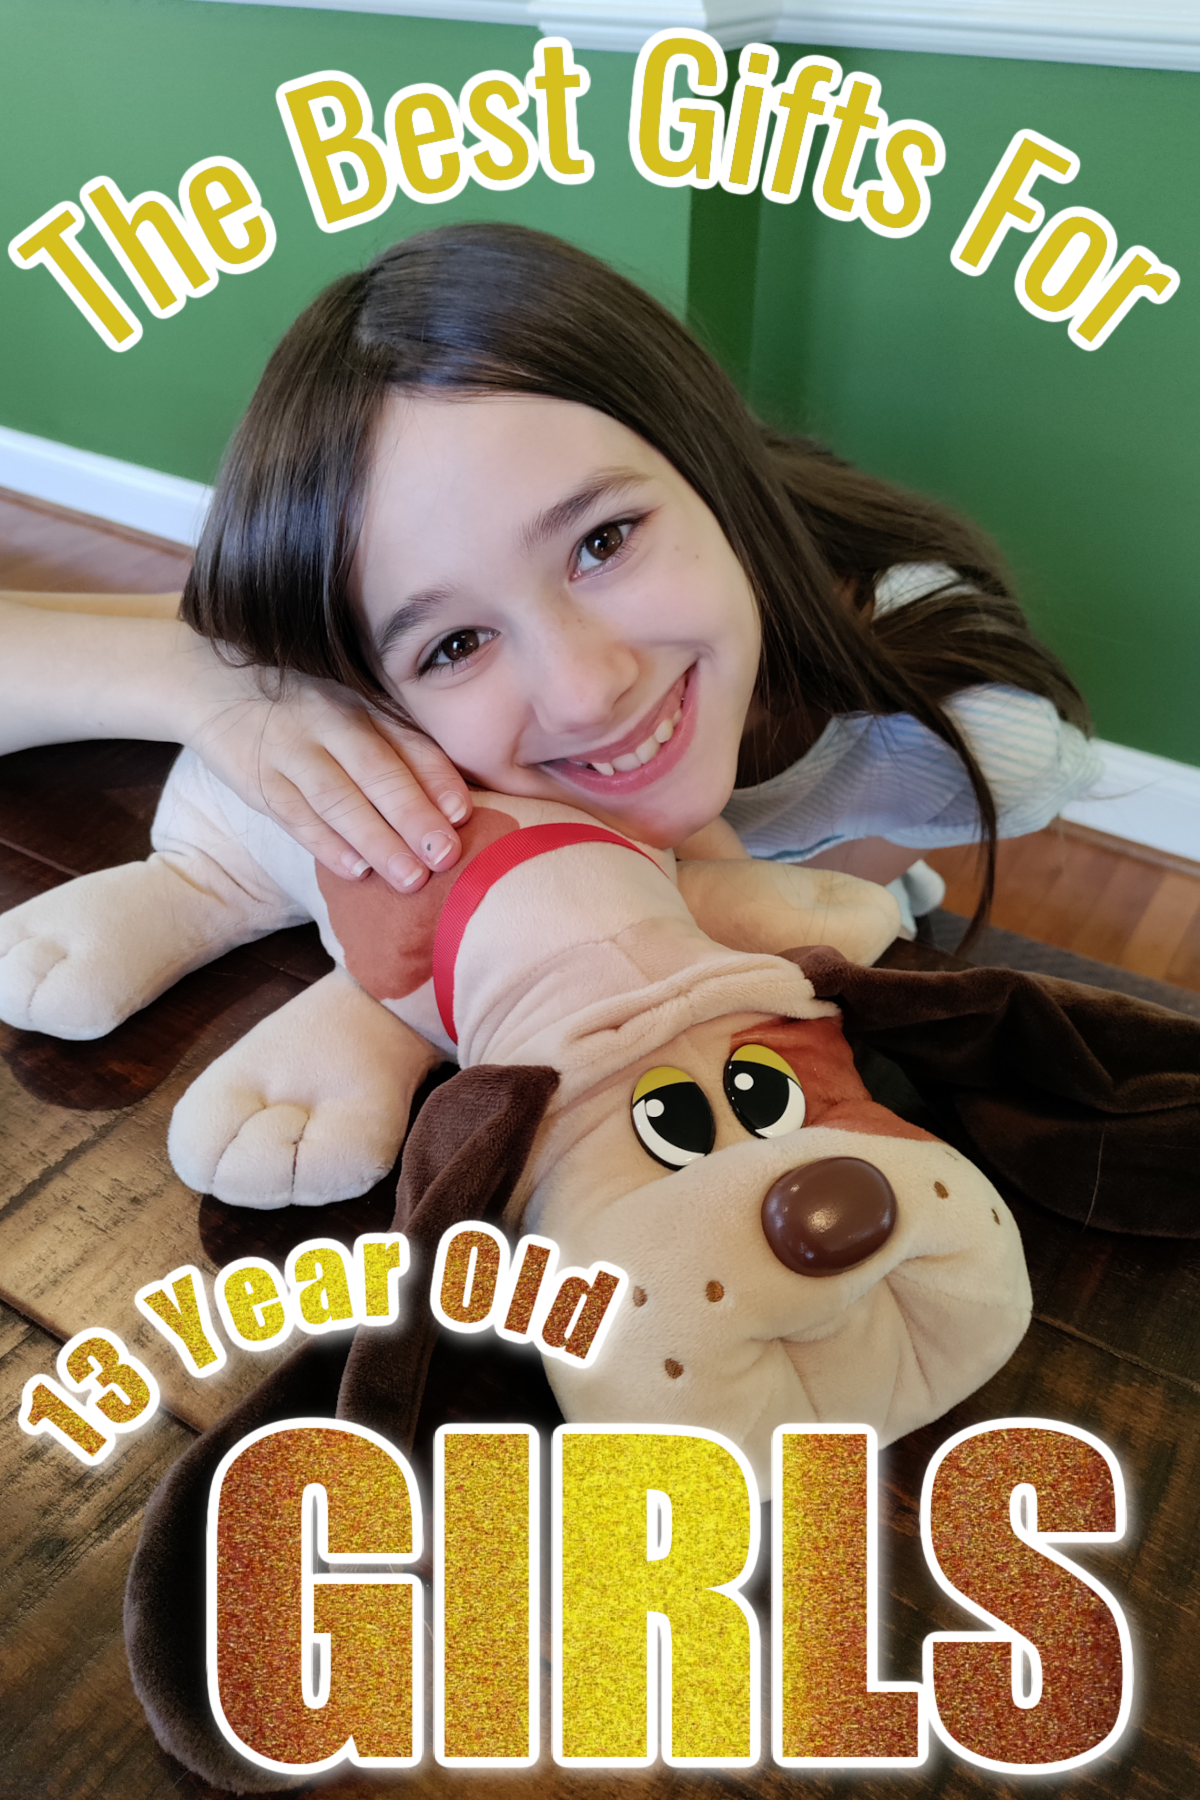 A girl with a dog plush and a text overlay that says "The Best Gifts for 13 year old girls"